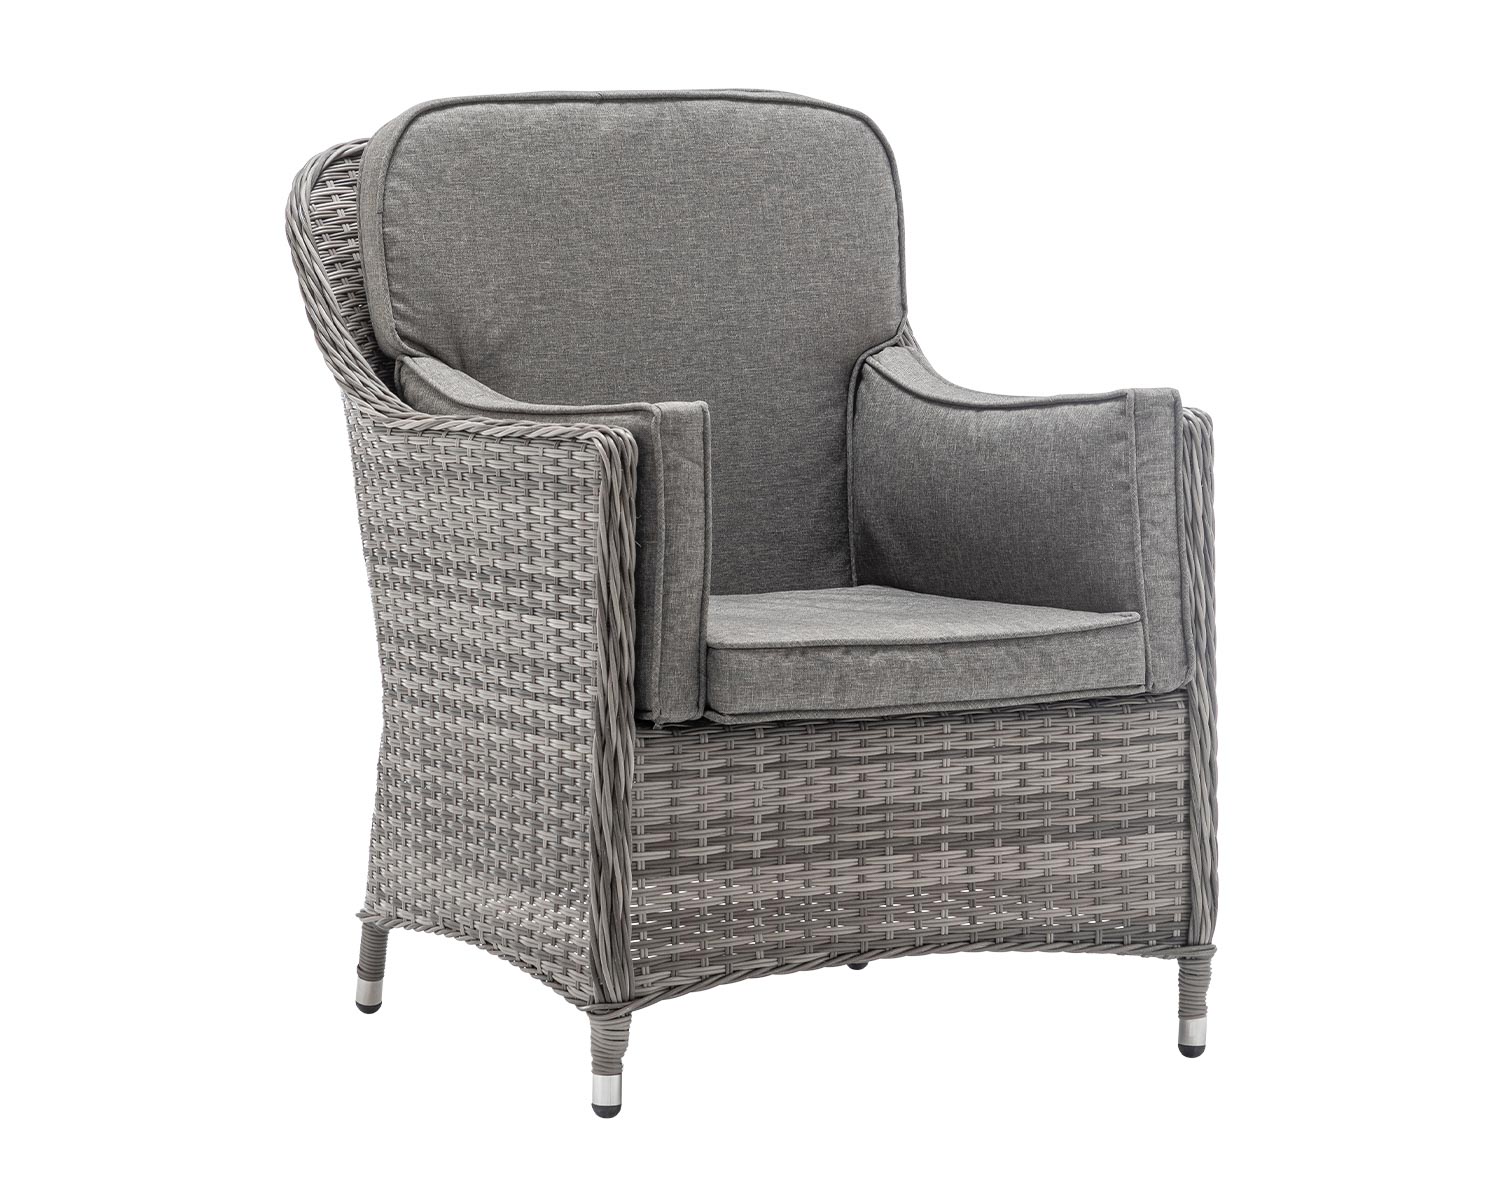 Pair Of Rattan Dining Chairs In Grey Lyon Rattan Direct